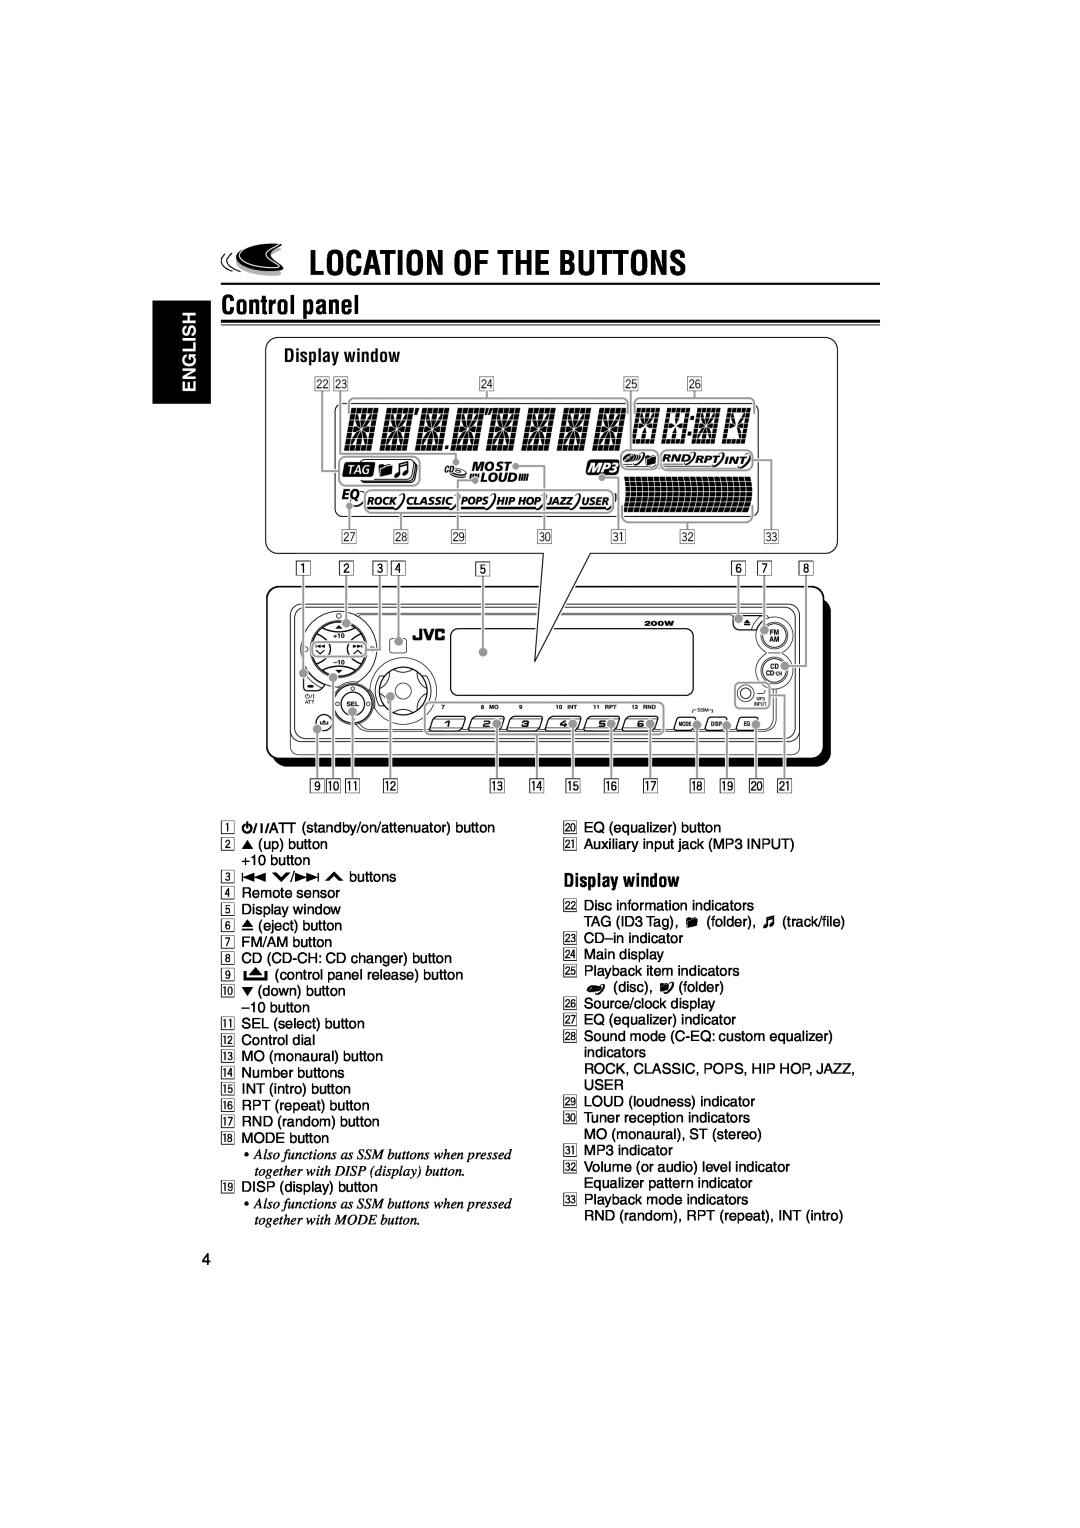 JVC KD-SX9350, KD-SX990 manual Location Of The Buttons, Control panel, English, Display window 